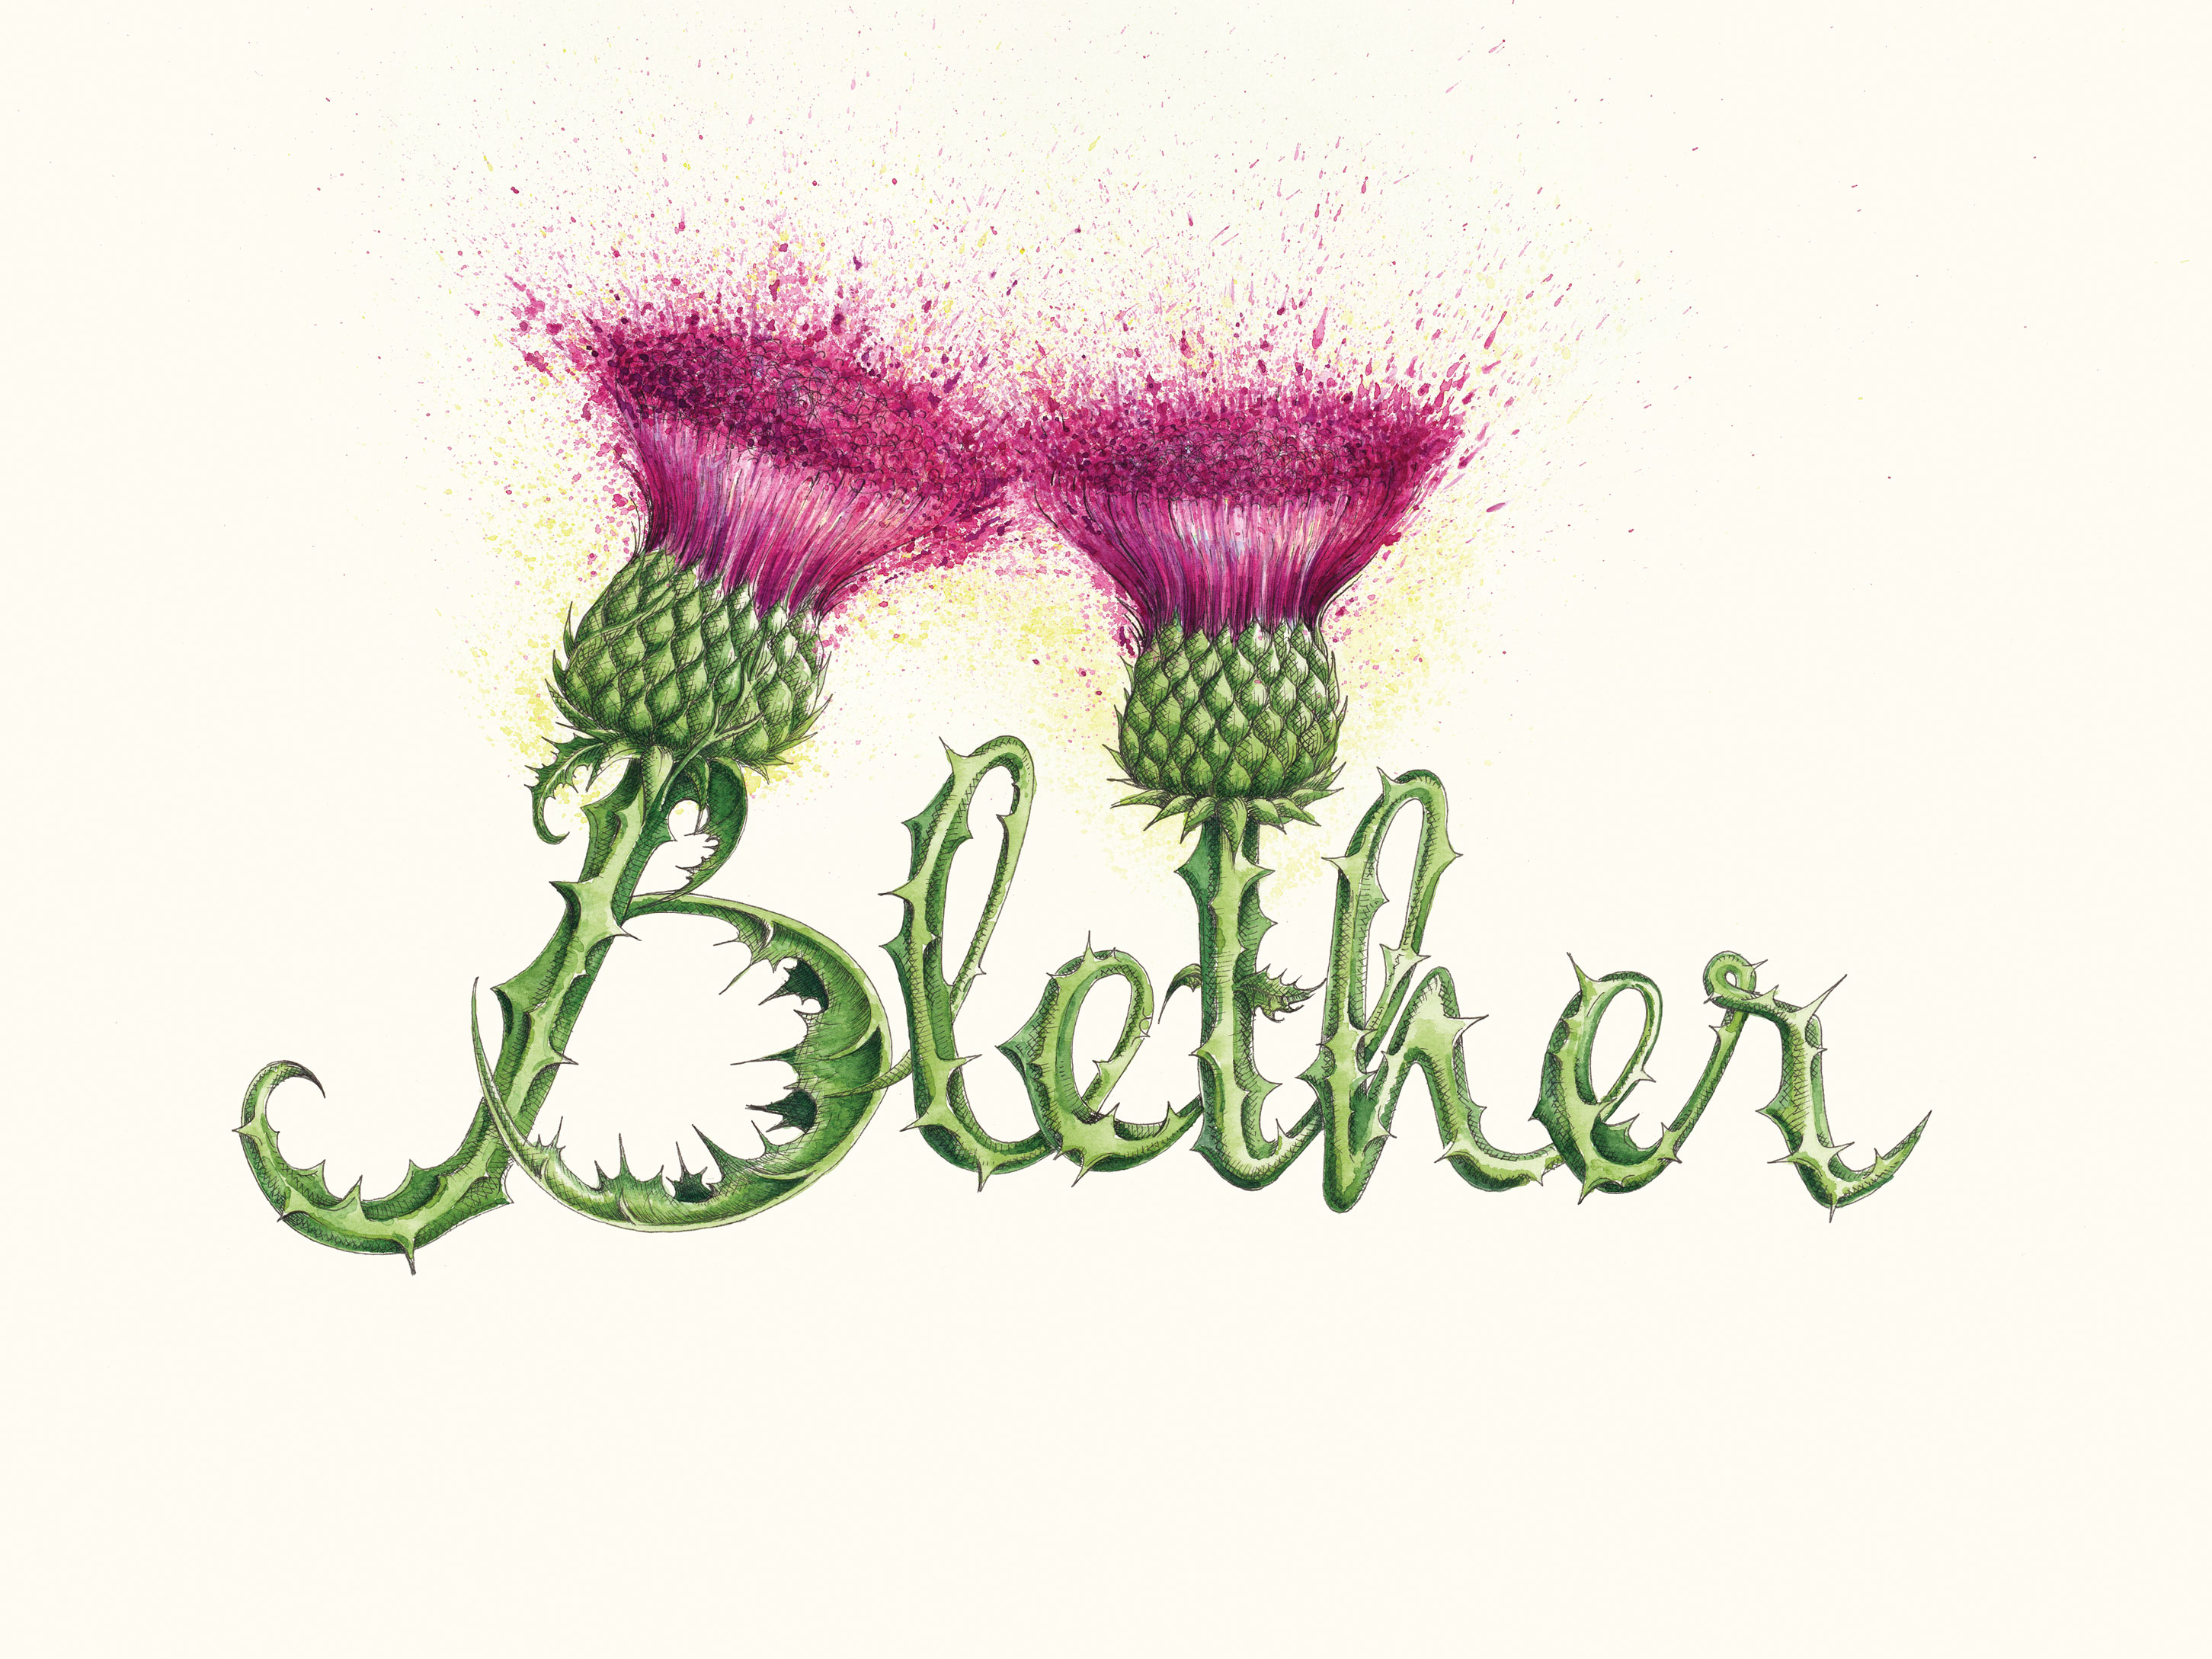 Blether a drawing by by Cat Lawson. Two thistles form the word blether with explosive colours bursting out of the thistle head.